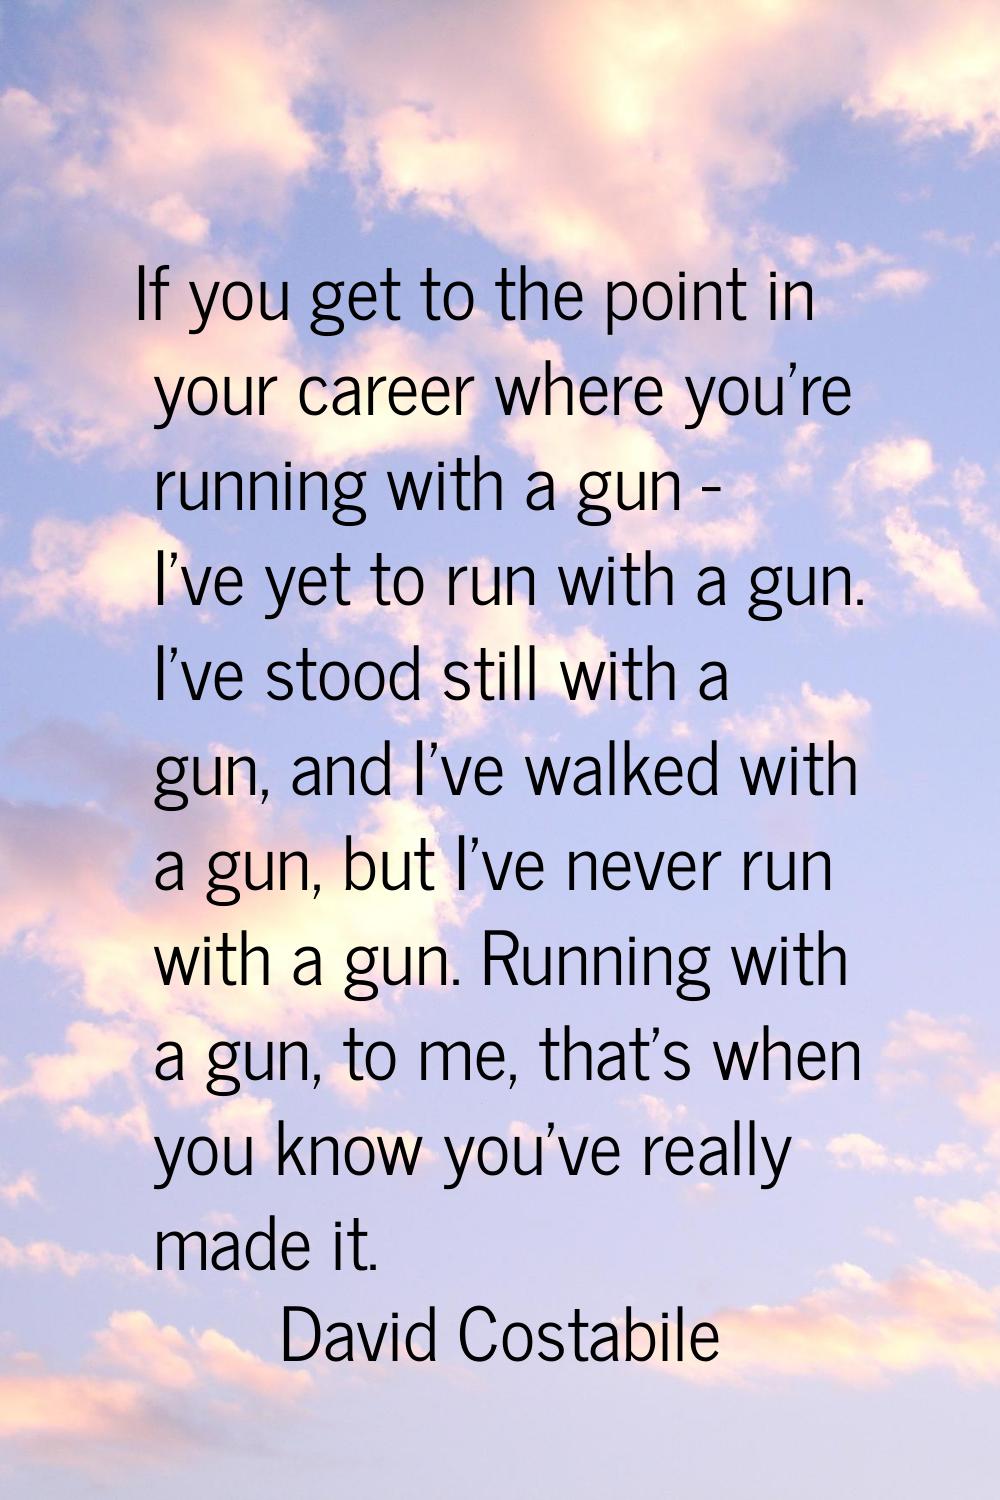 If you get to the point in your career where you're running with a gun - I've yet to run with a gun